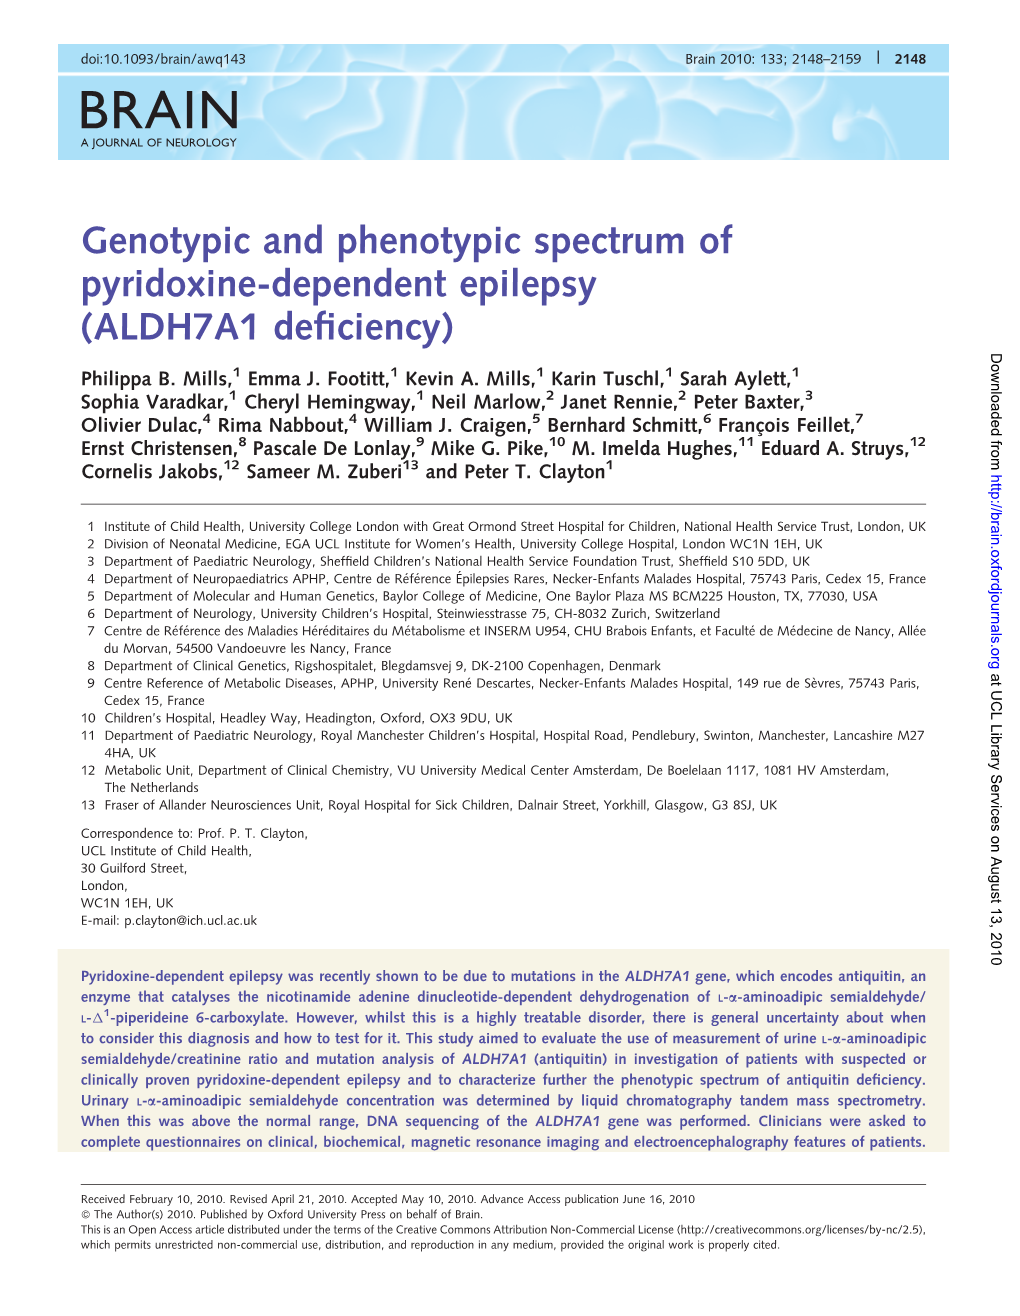 Genotypic and Phenotypic Spectrum of Pyridoxine-Dependent Epilepsy (ALDH7A1 Deﬁciency) Downloaded from Philippa B